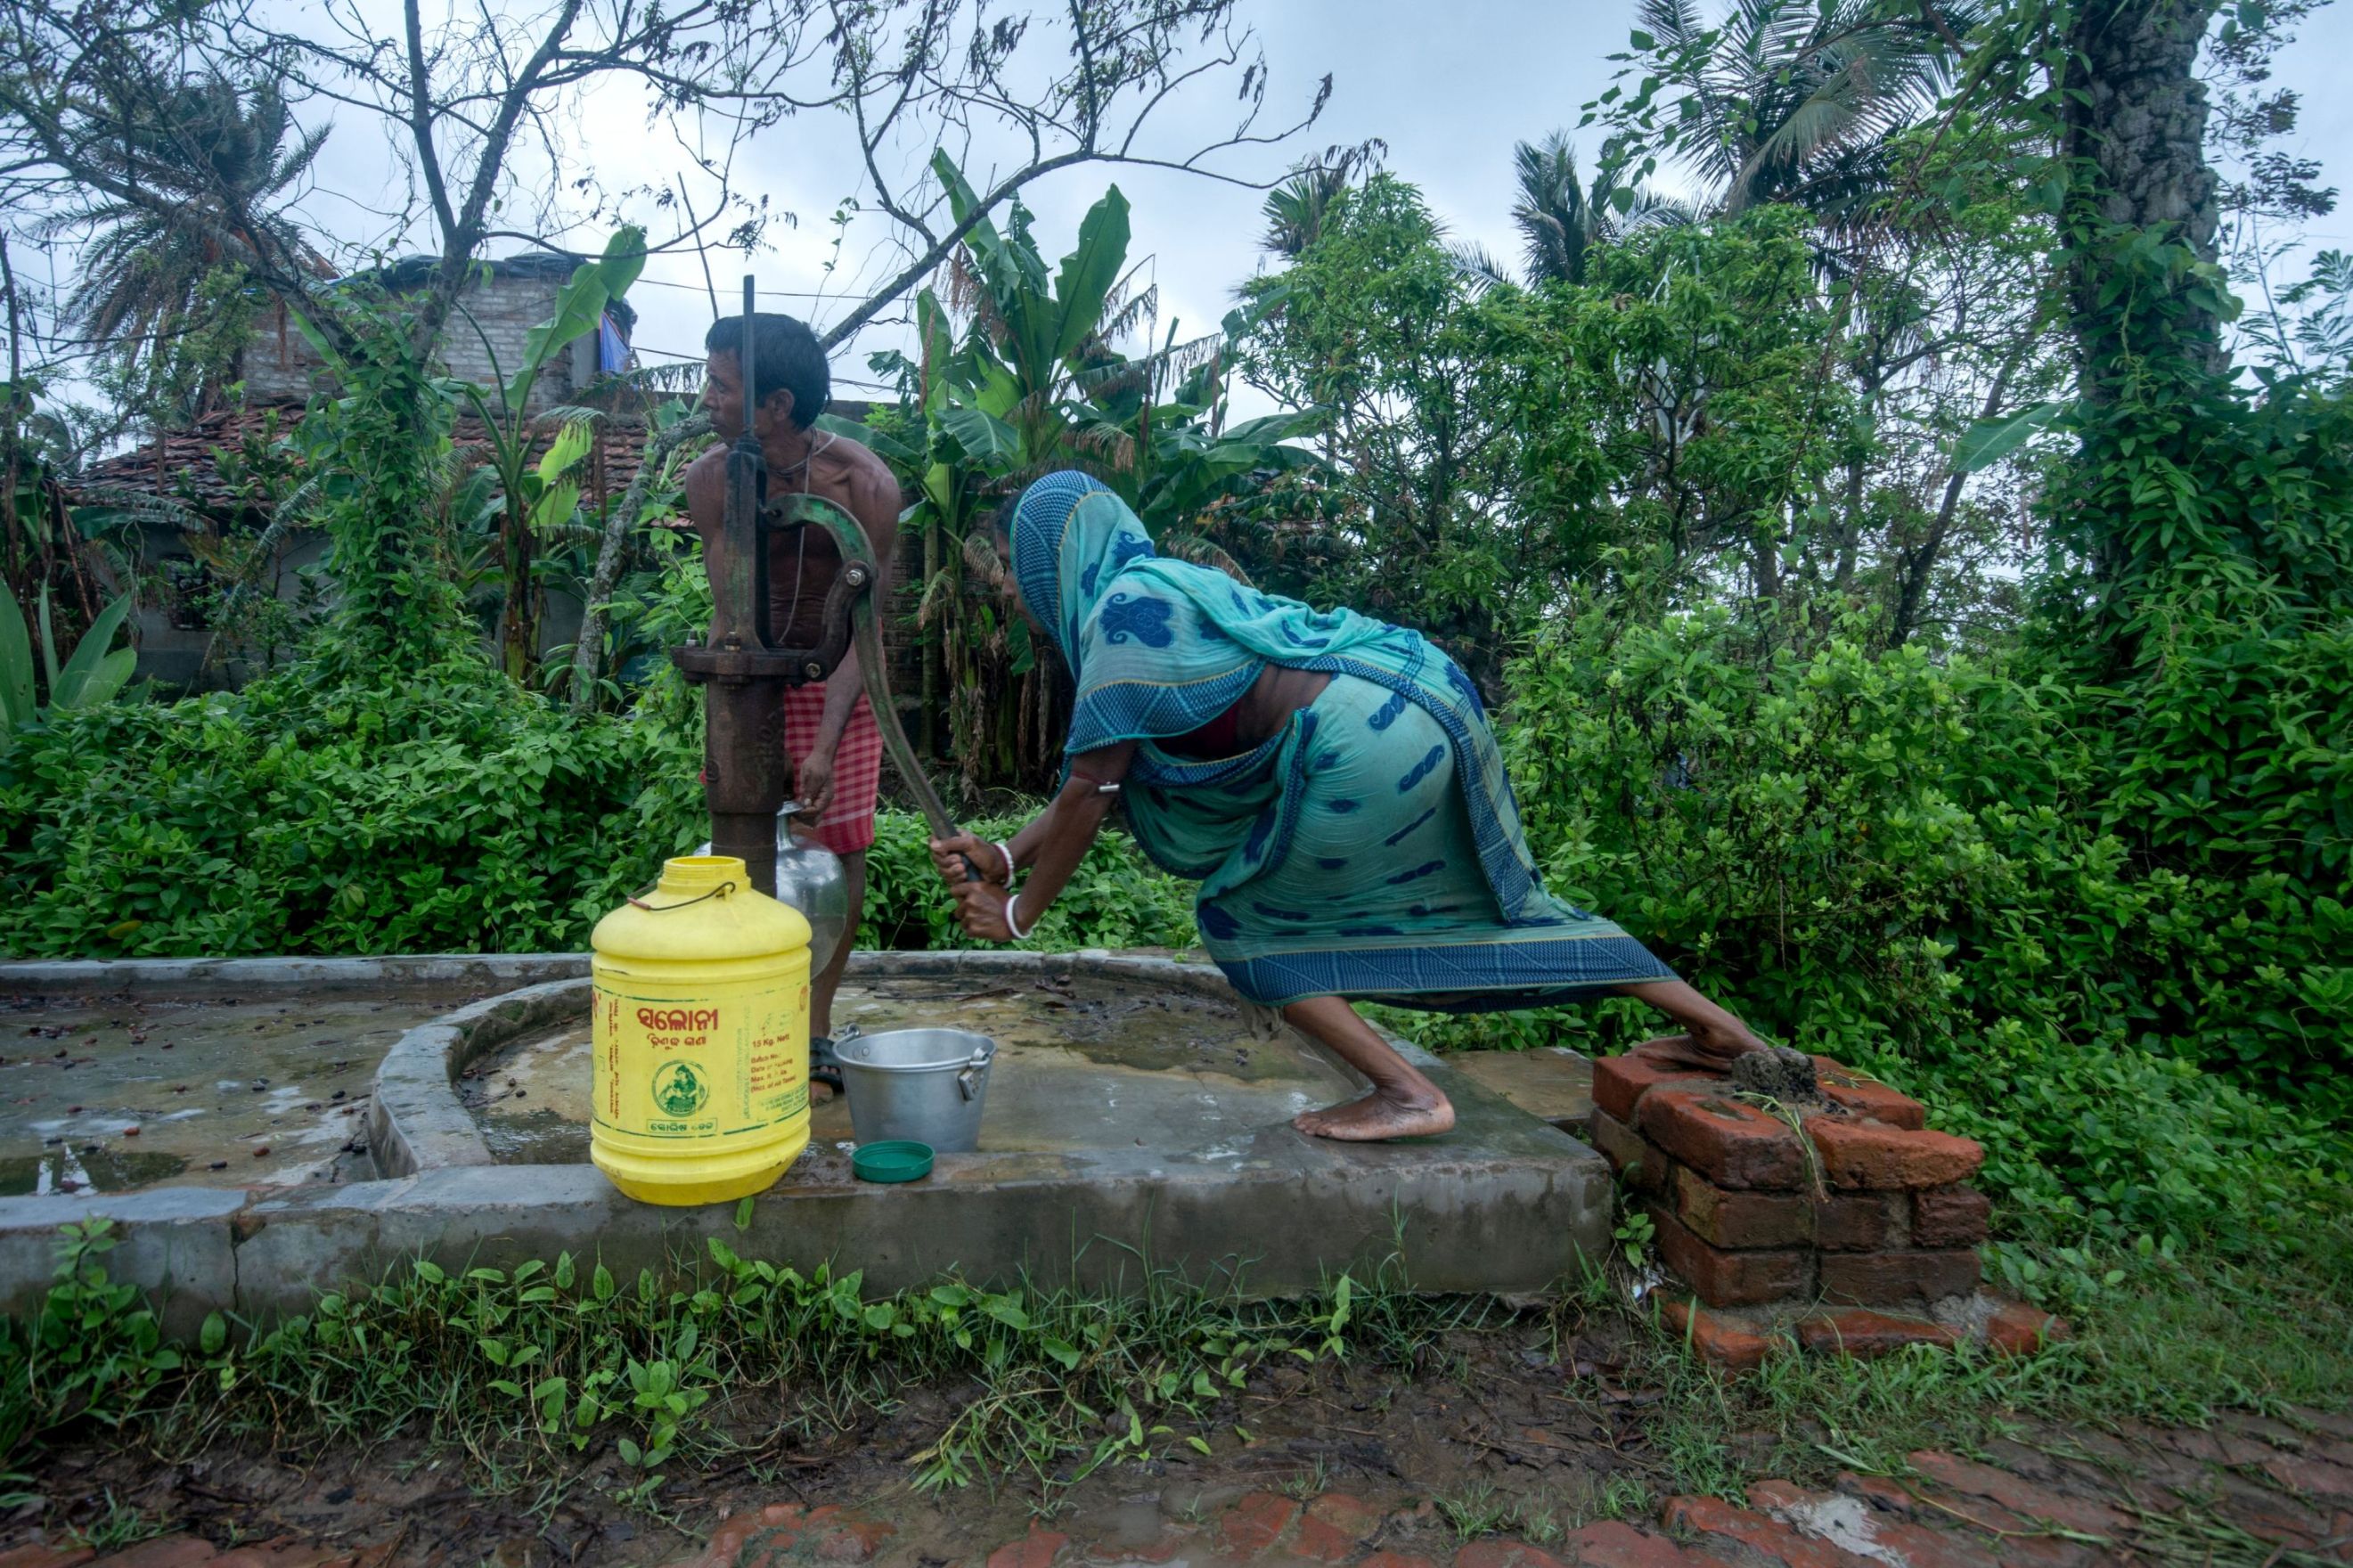 Locals have to travel for around 30 minutes to fetch water. (Image: WaterAid, Subhrajit Sen)       